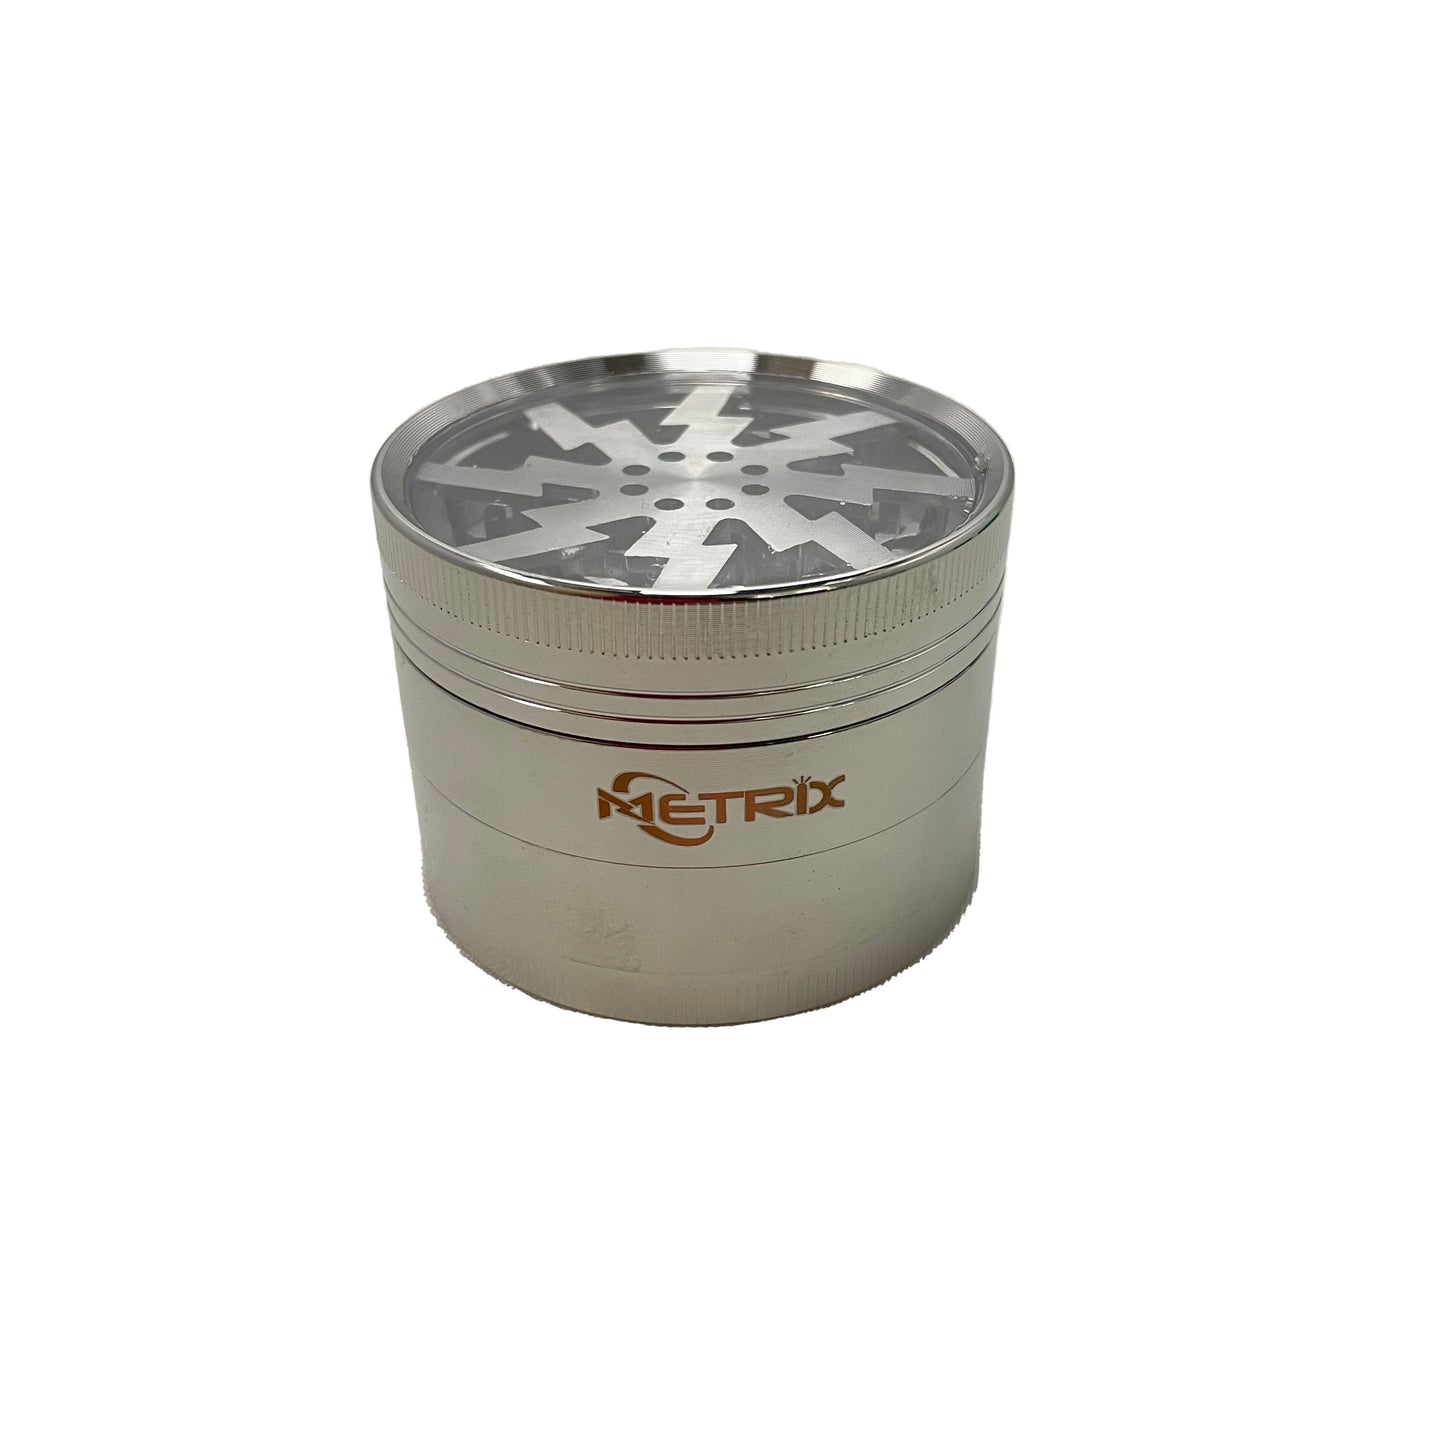 Metrix 4 Chamber Grinder with Abstract Design